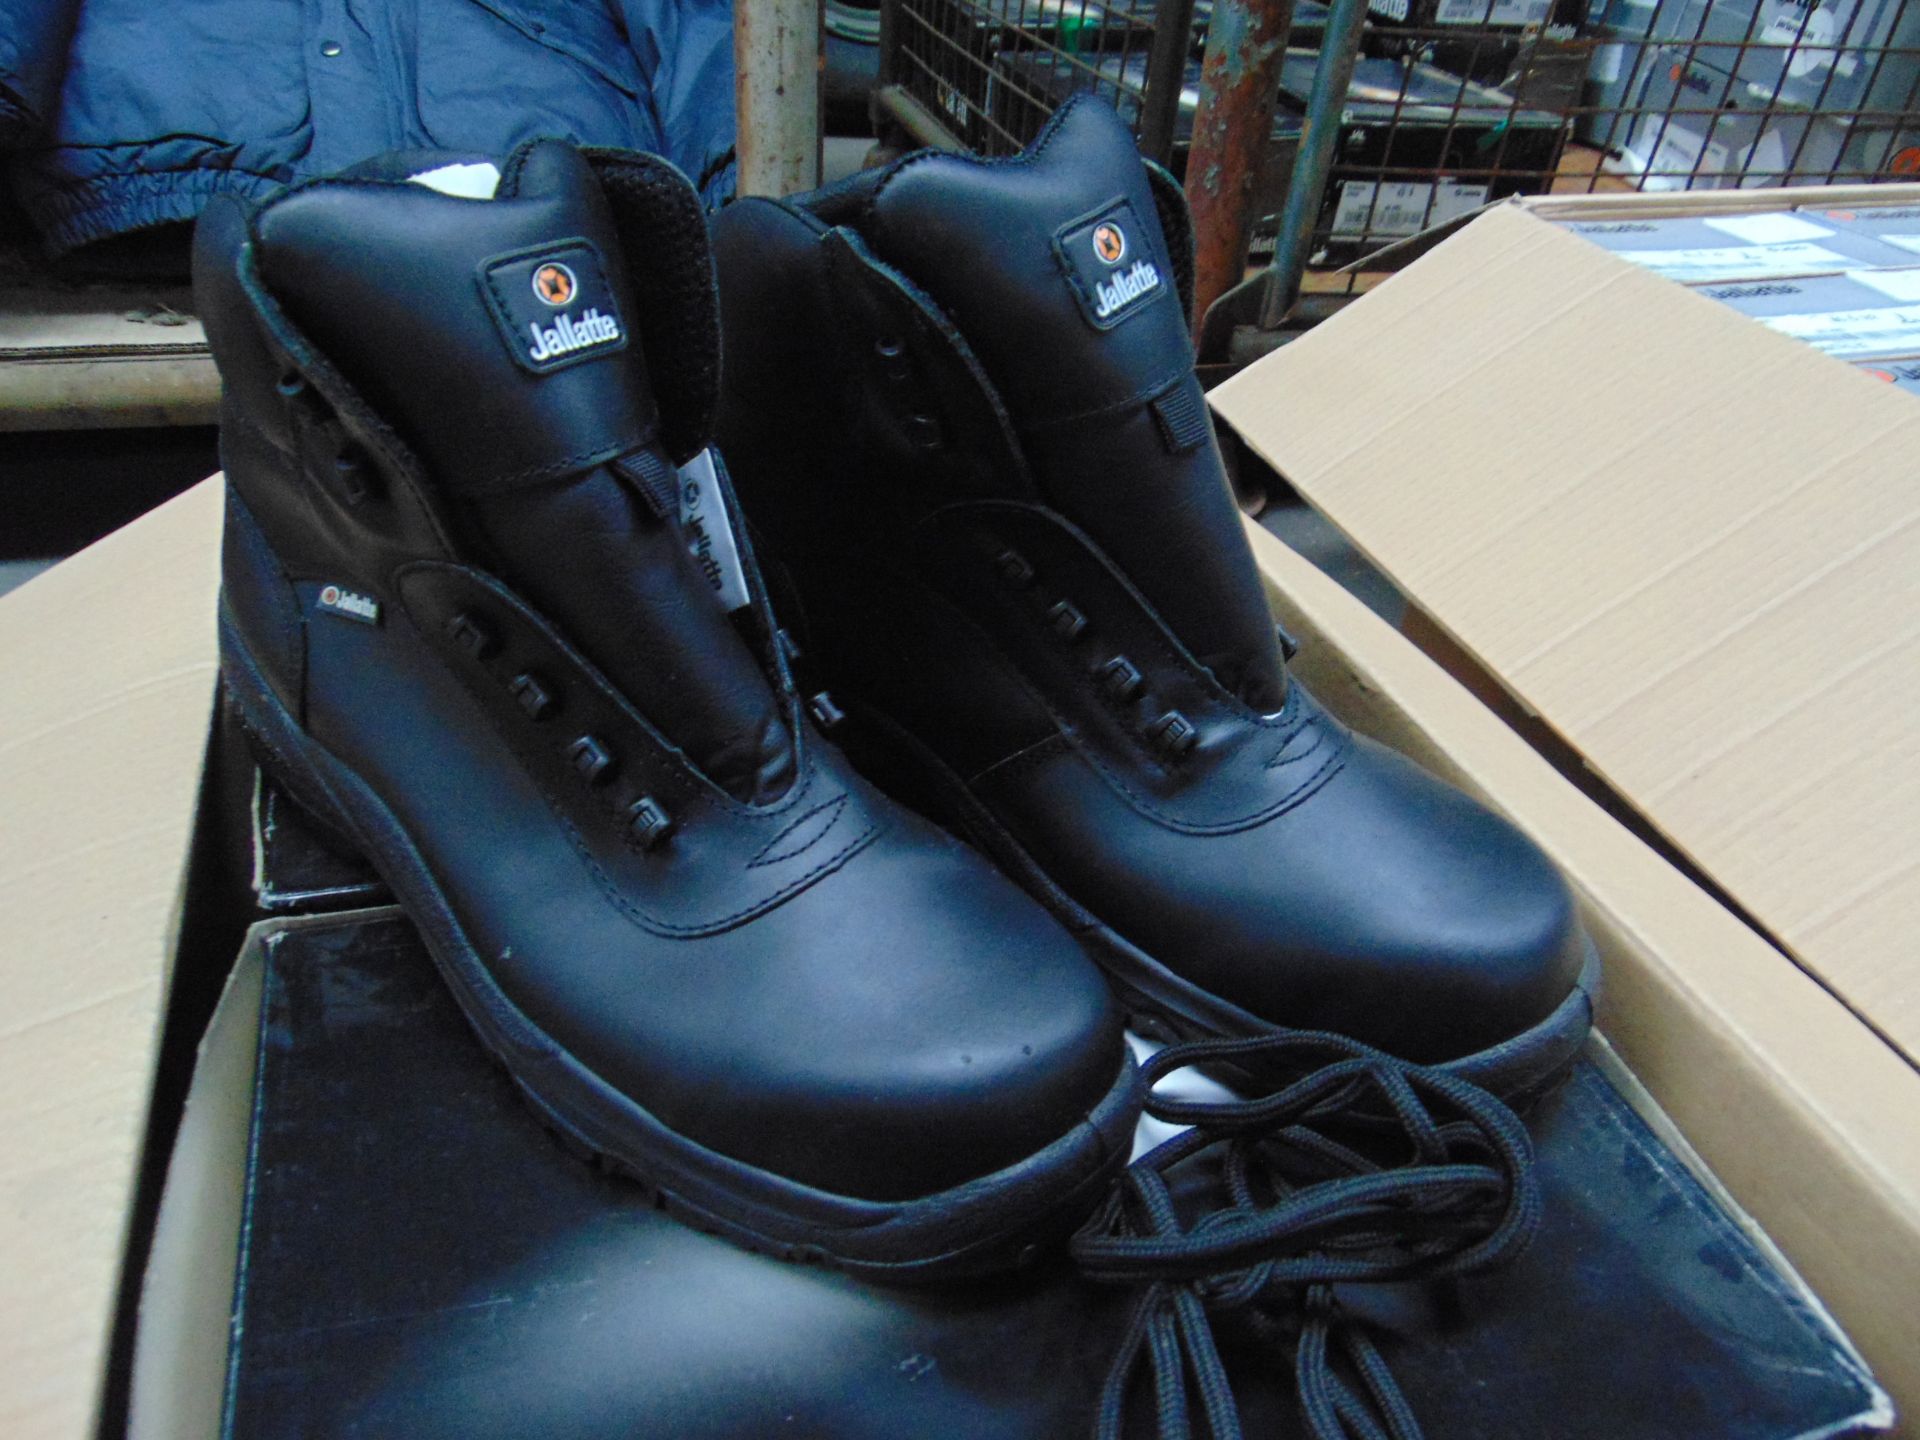 Qty 5 x UNISSUED Jallatte Safety Boots Size 12 - Image 2 of 4